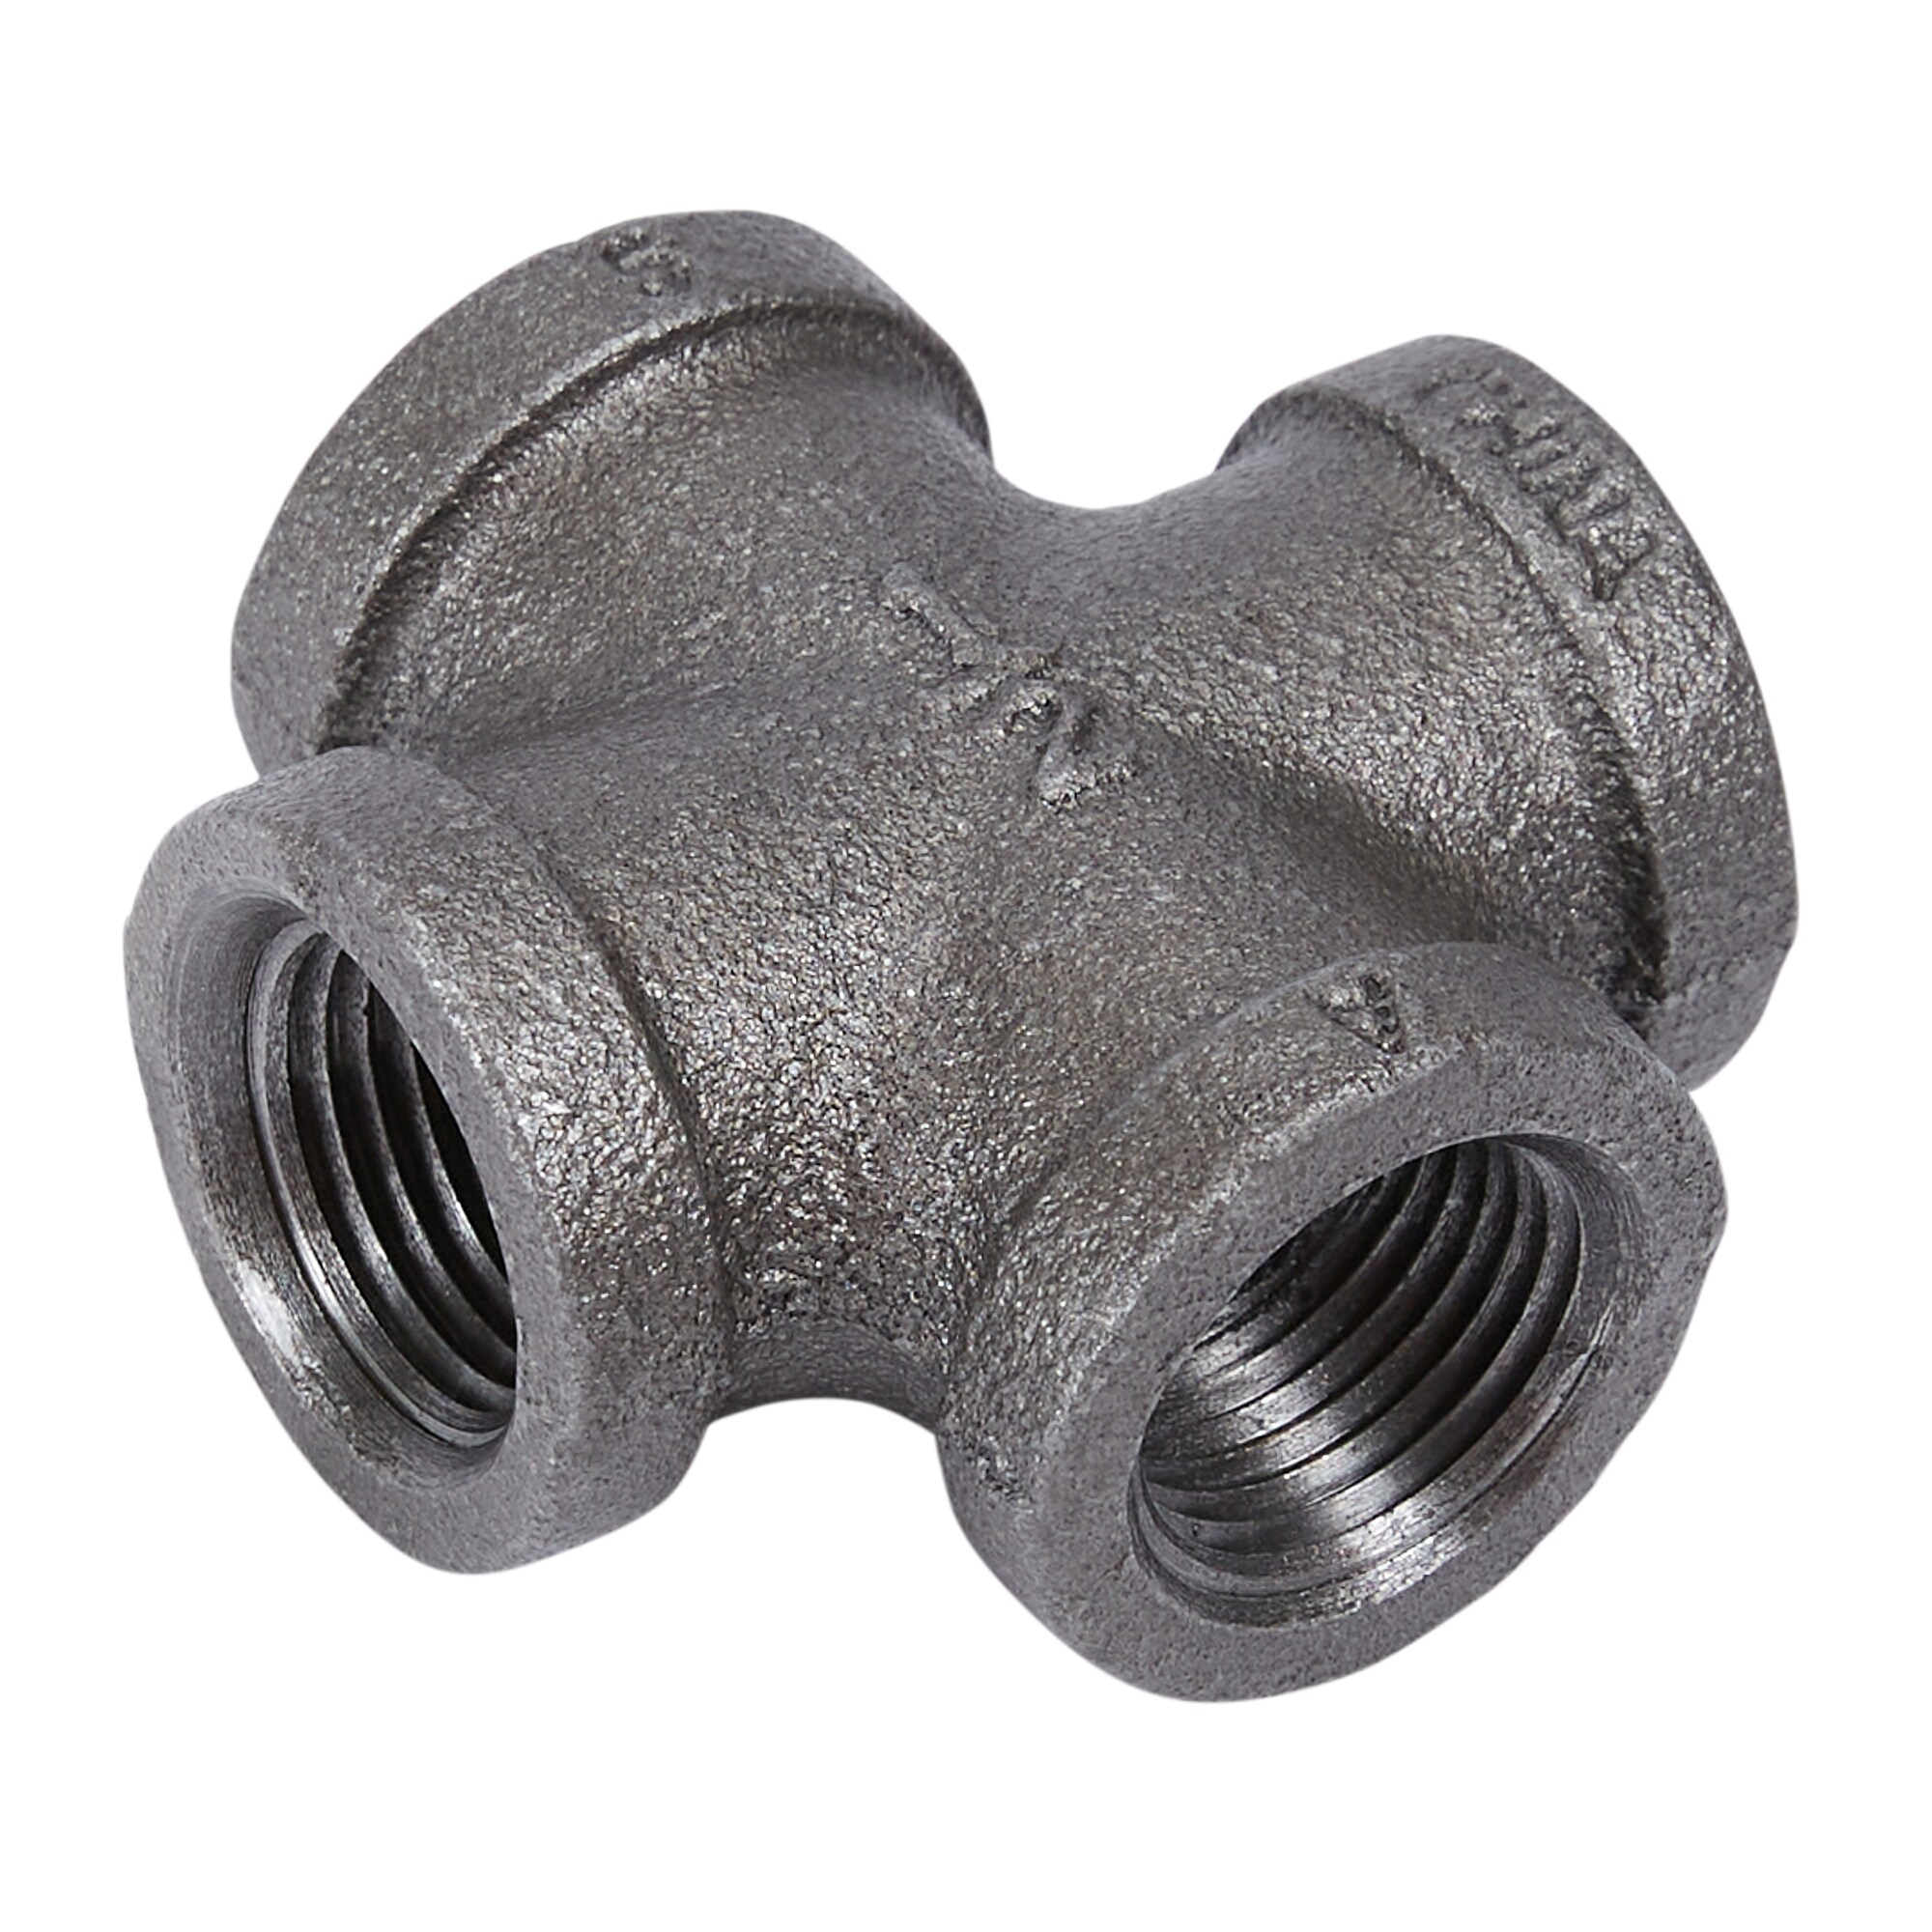 one 3/4" GALVANIZED MALLEABLE IRON CROSS 4-way TEE fitting pipe npt LDR 